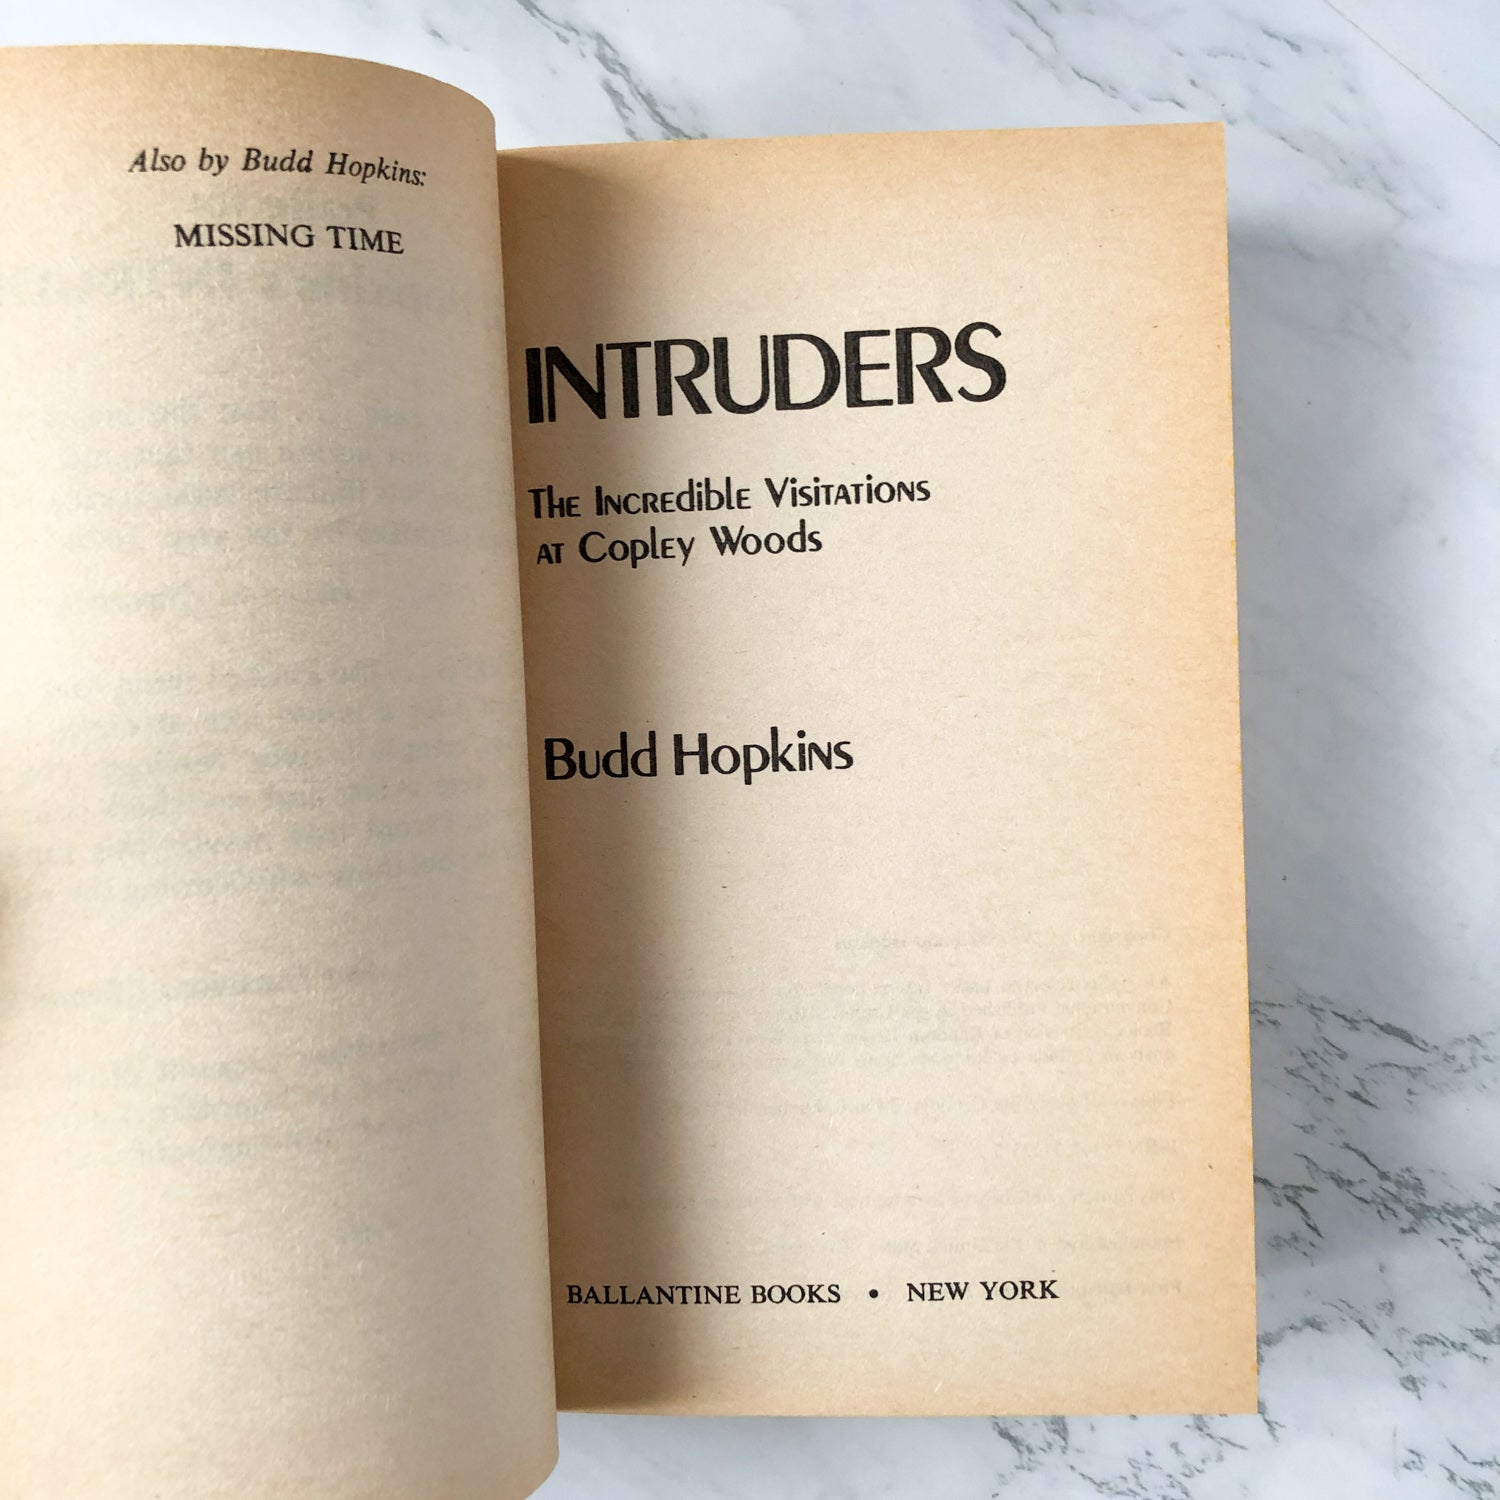 Intruders: The Incredible Visitations at Copley Woods (Paperback)